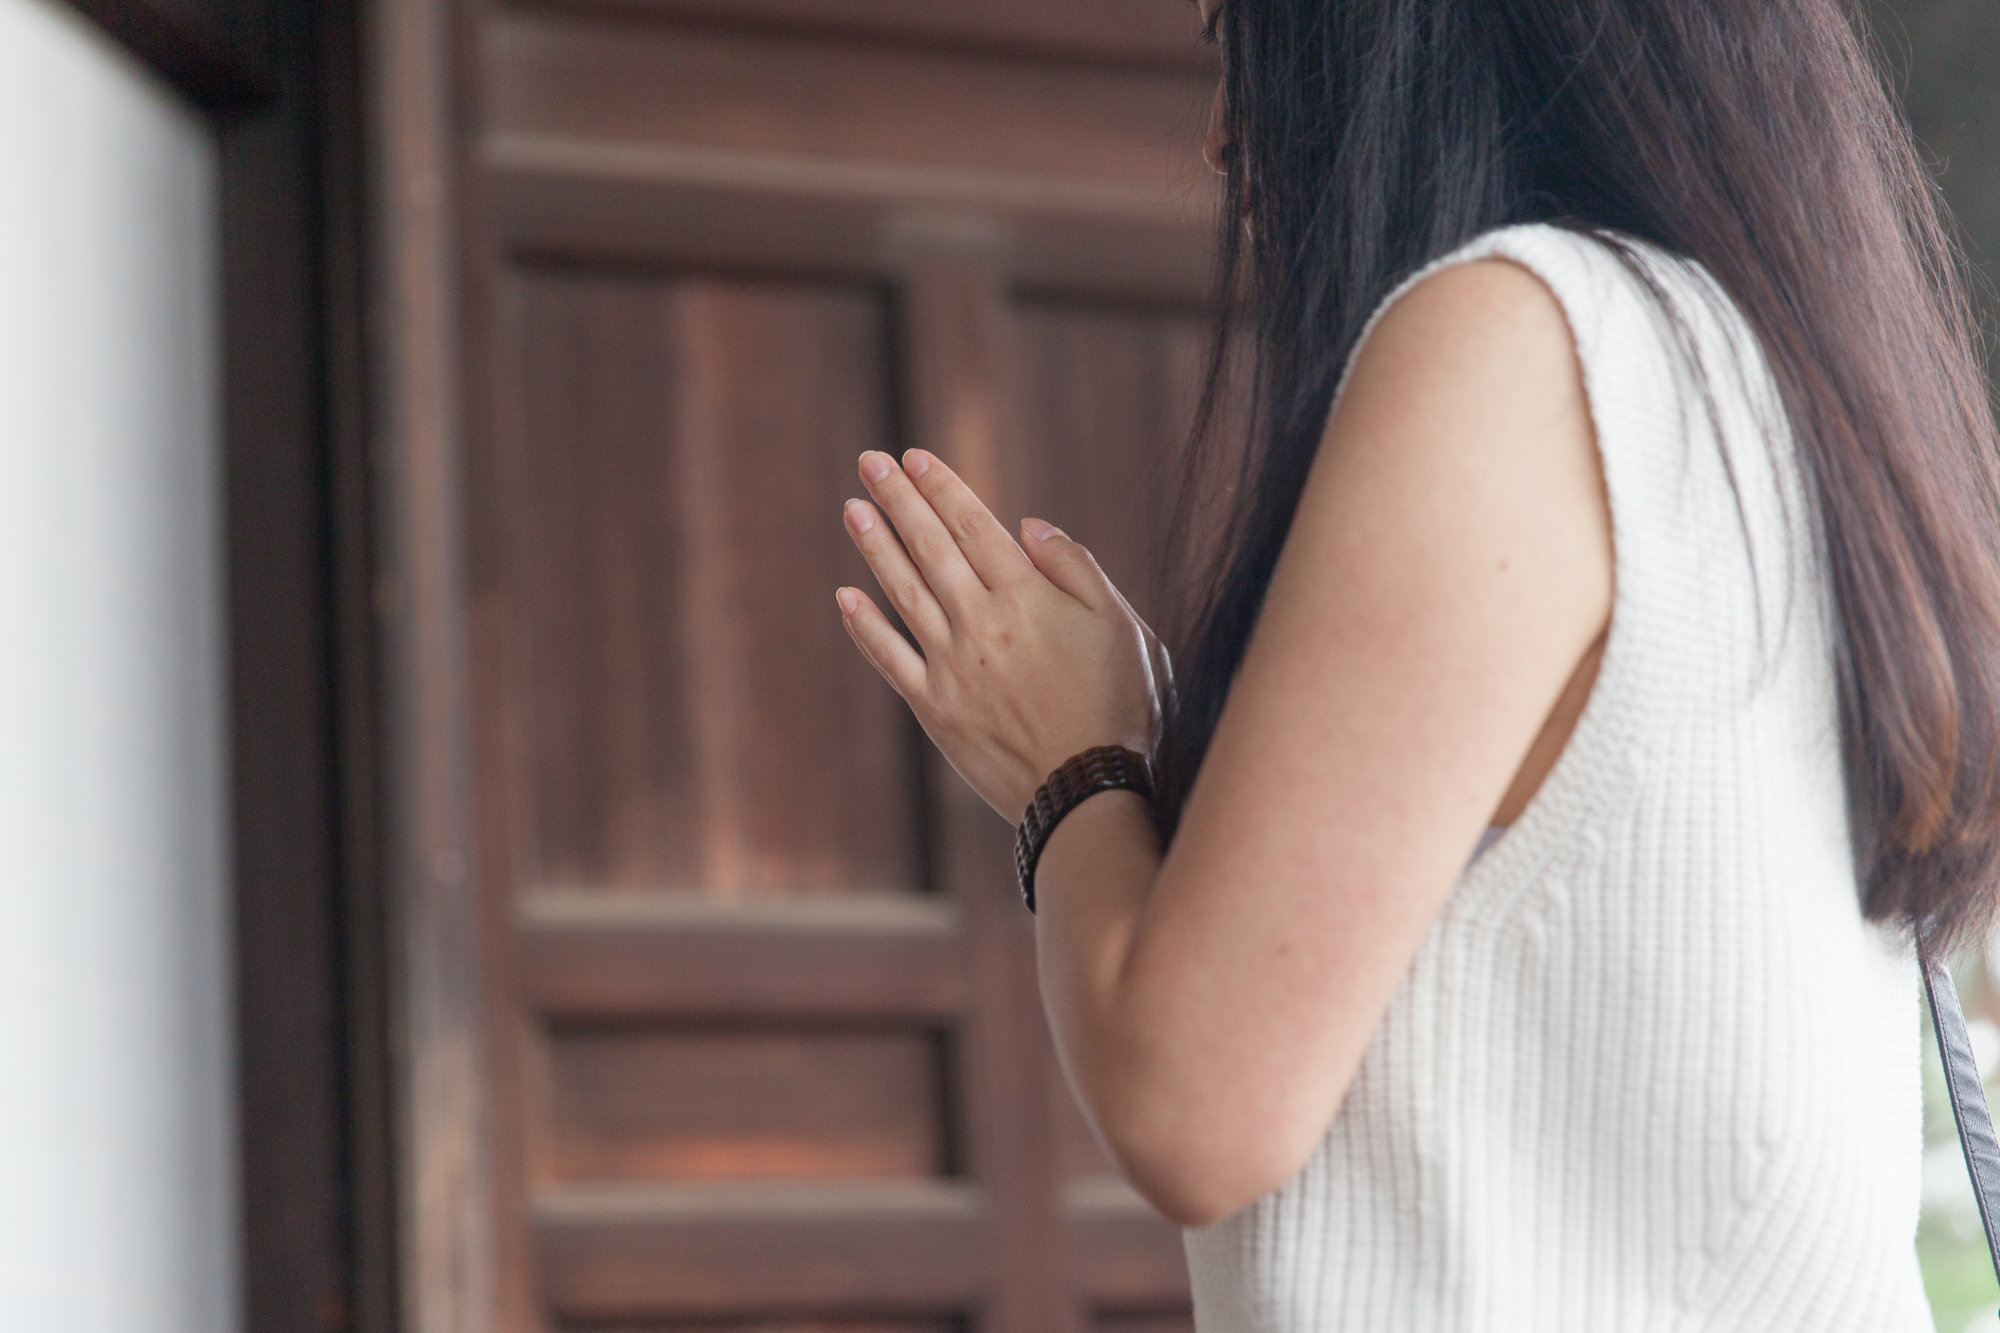 Praying for a role: Do Japanese actresses think getting religious is a good career move? | ISTOCK